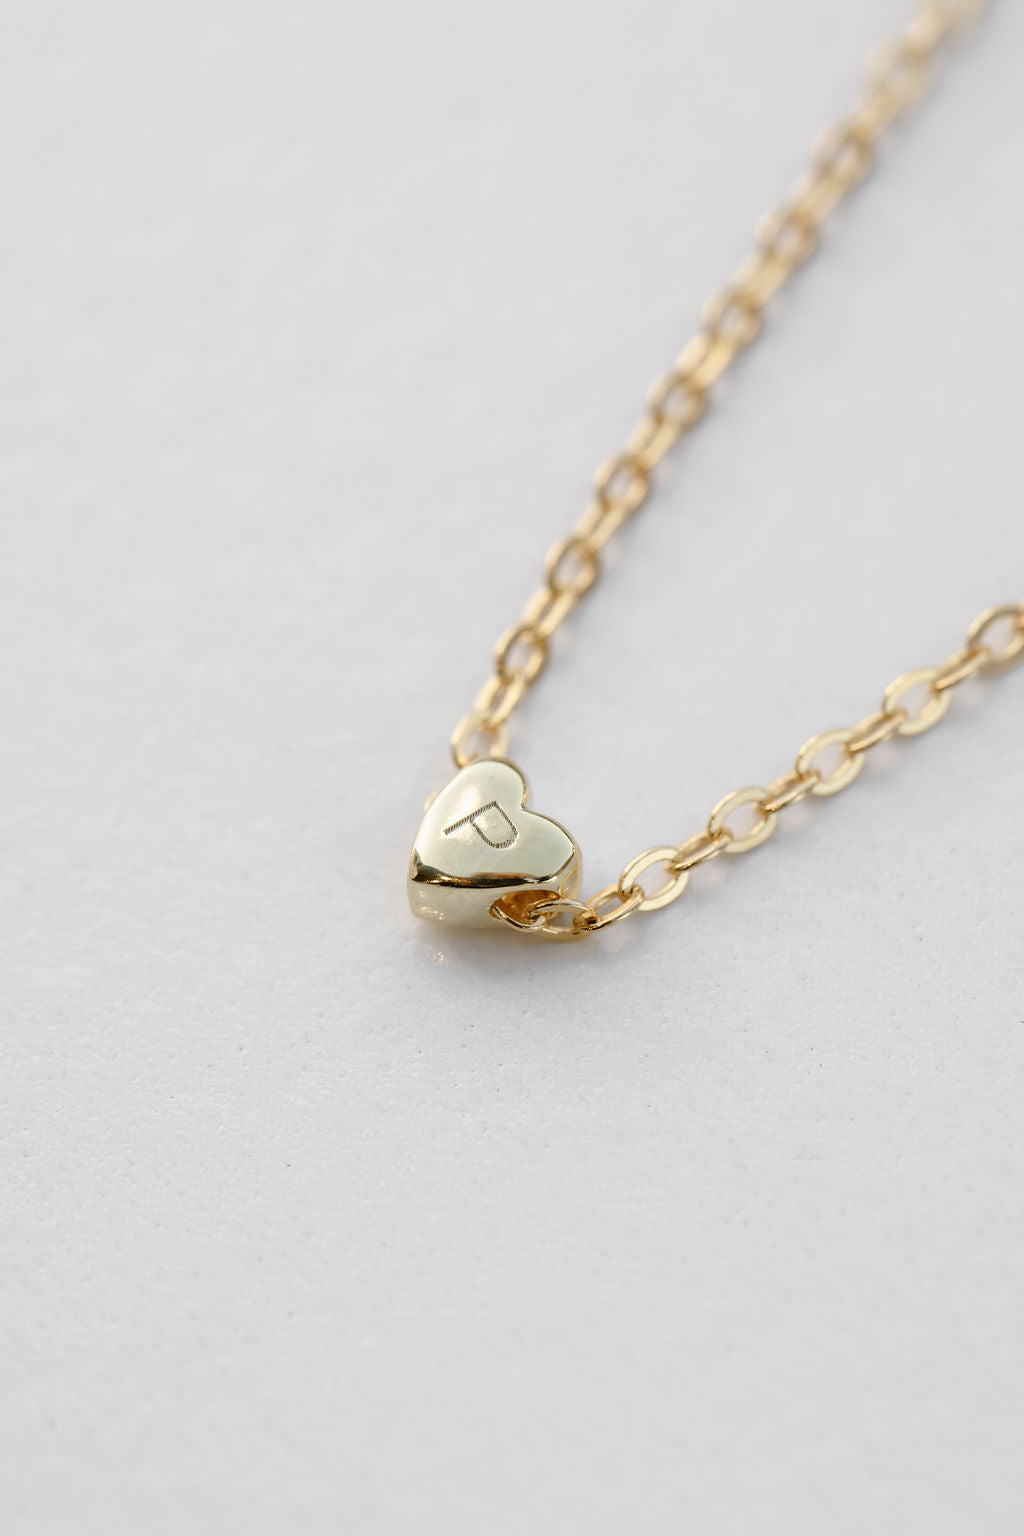 engraved heart pendant necklace